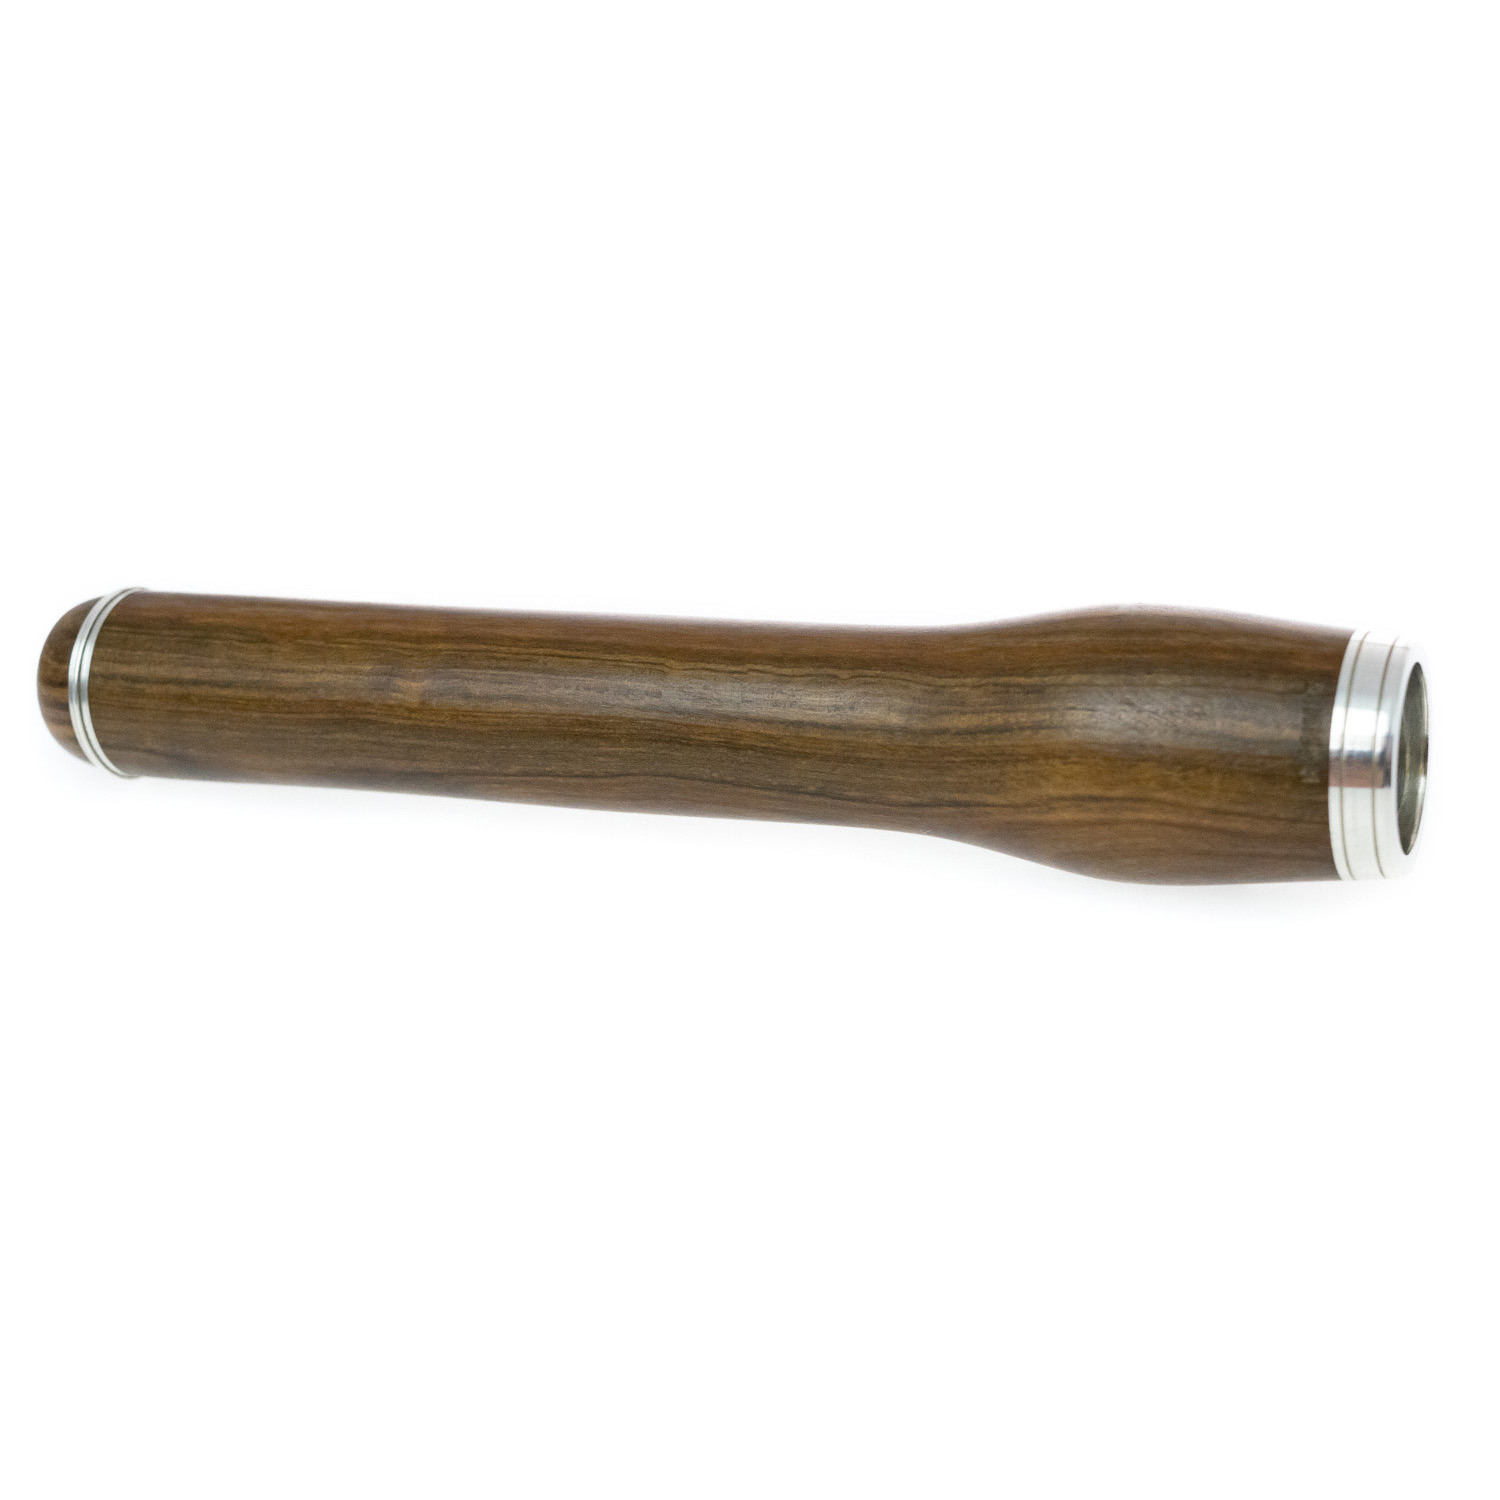 August Richard Hammig Head Joint - Modified Wave in Cocus Wood